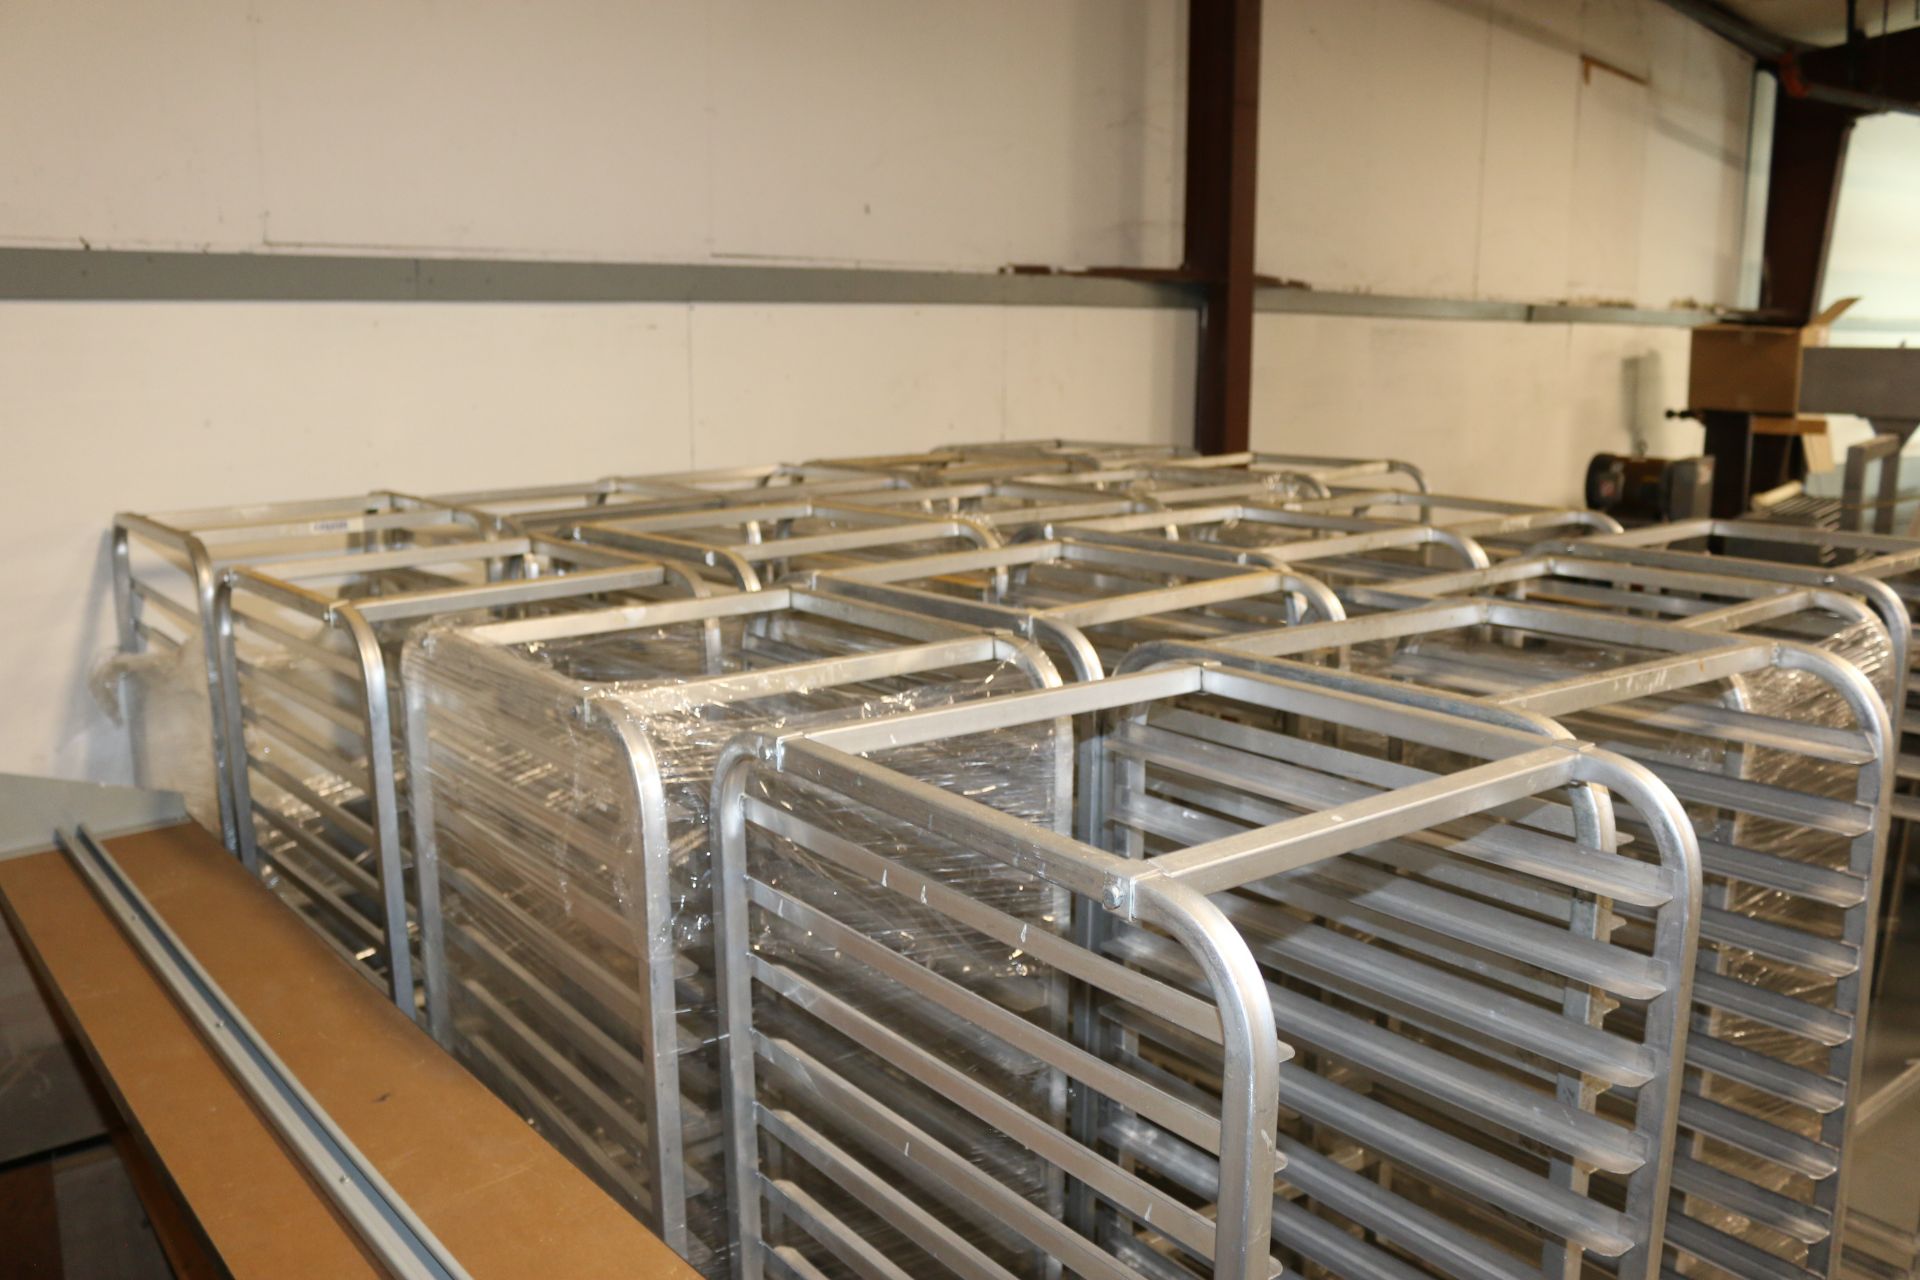 Aluminum Bakery Racks, Holds 18" W x 25" L Trays (IN#68903)(LOCATED AT M. DAVIS GROUP AUCTION - Image 8 of 9